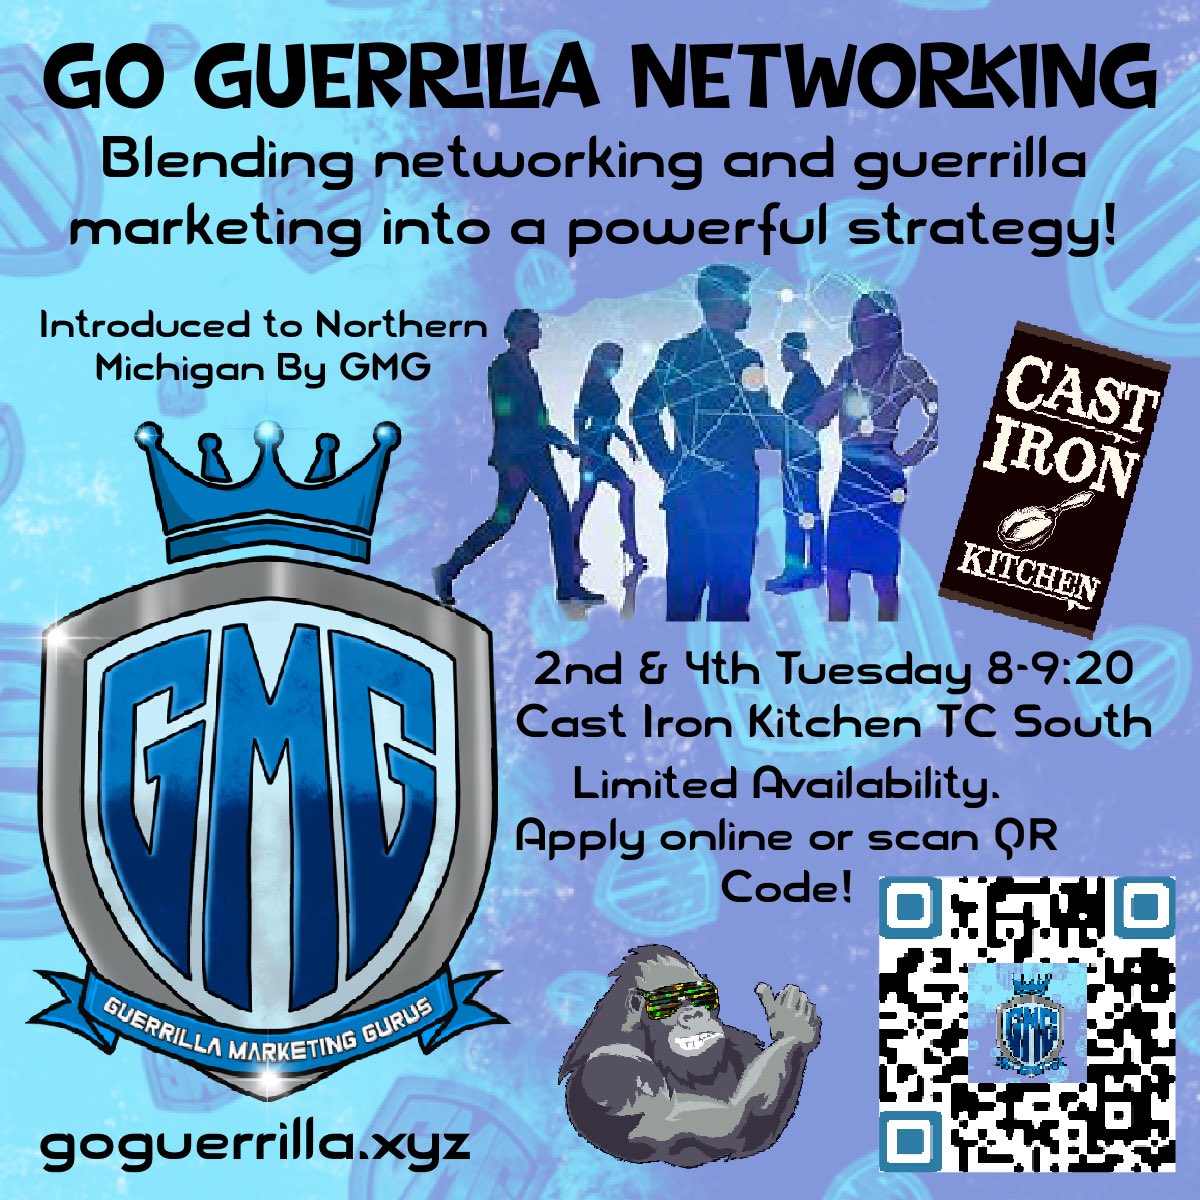 Kick start your business or nonprofits growth into 2024 and beyond! GMG is combining the power of business networking with the innovative approach of guerrilla marketing to bring Go Guerrilla Networking. Join our first breakfast!
#traversecity #networking #guerrillamarketing